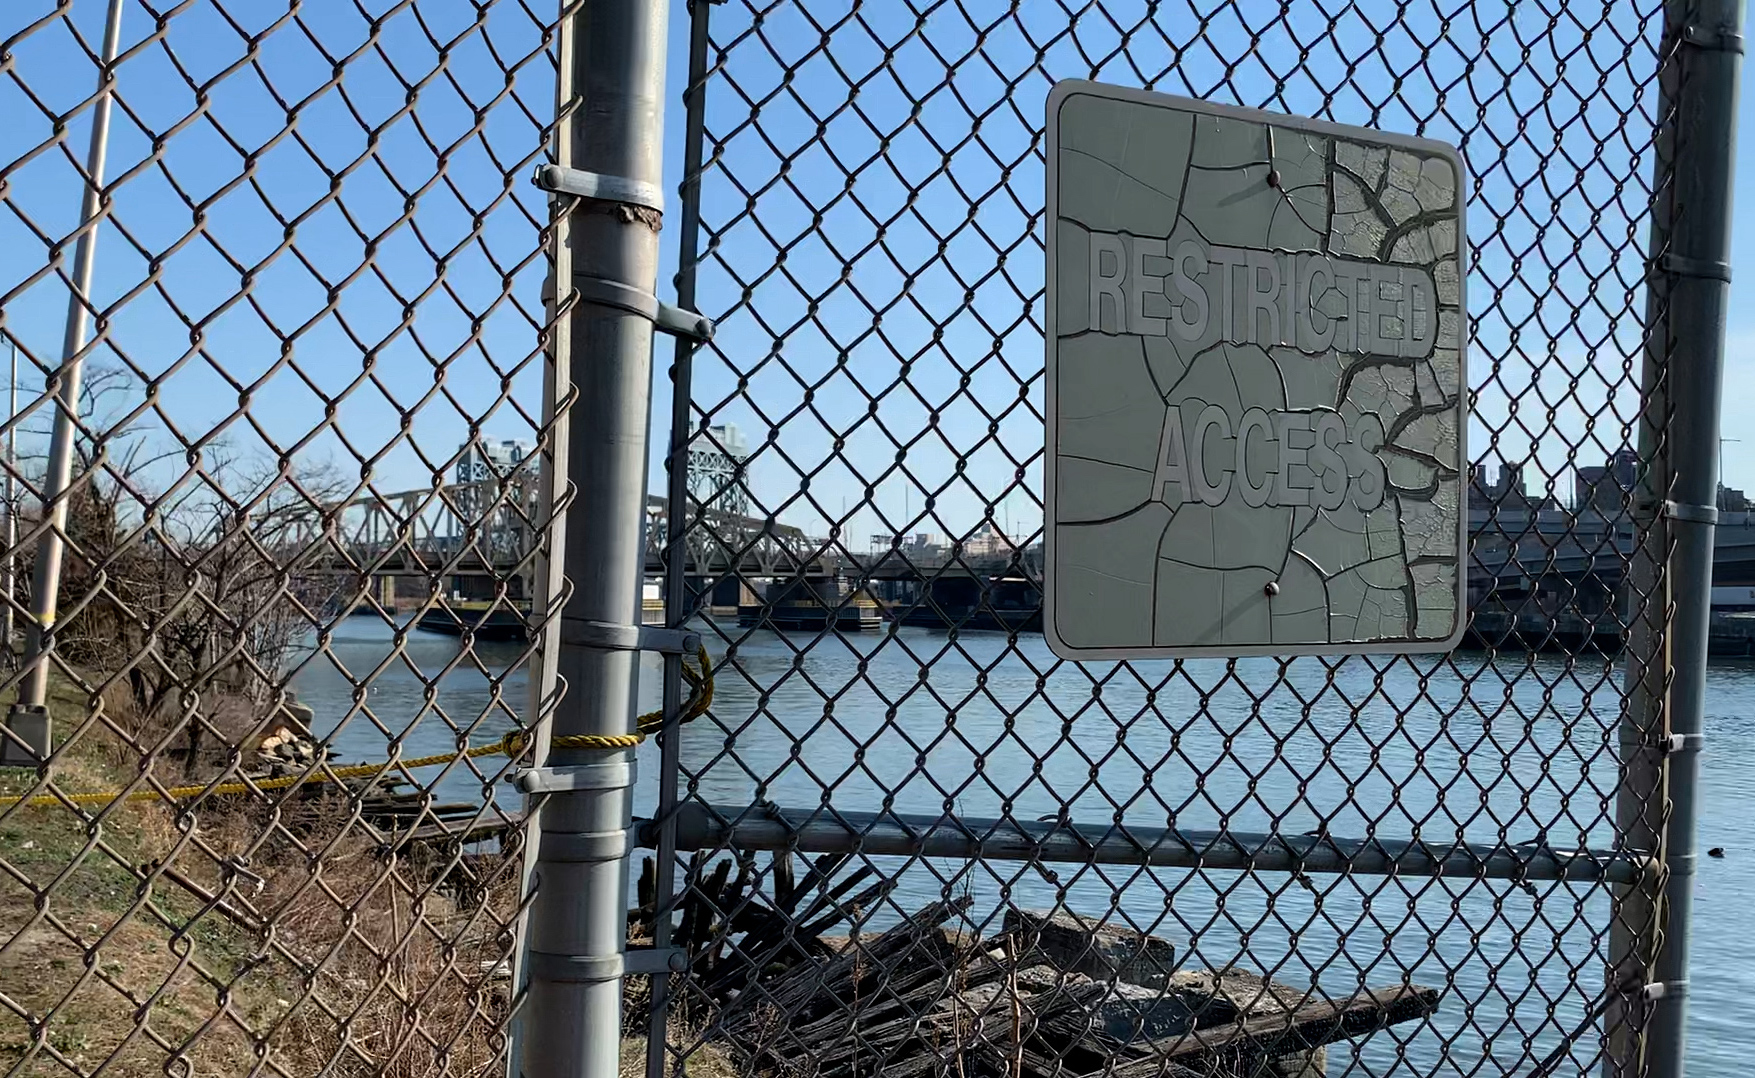 The waterfront along the Harlem River behind a chain link fence. A sign reads "Restricted Access"